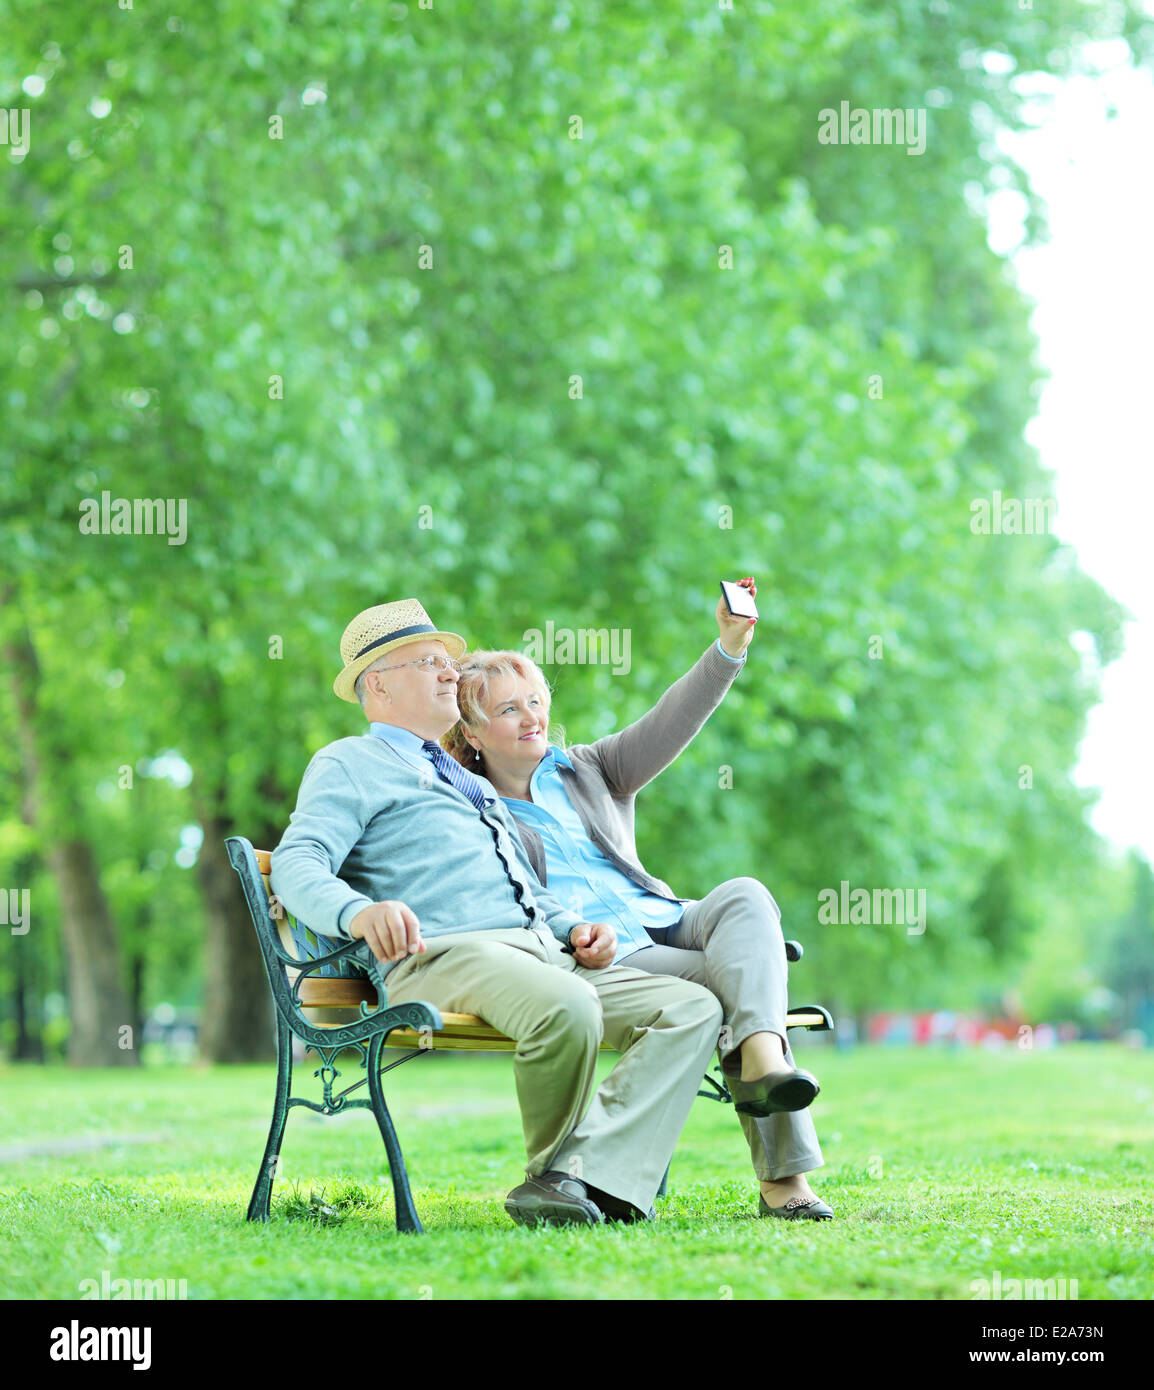 Elderly couple taking a selfie in the park seated on a wooden bench Stock Photo